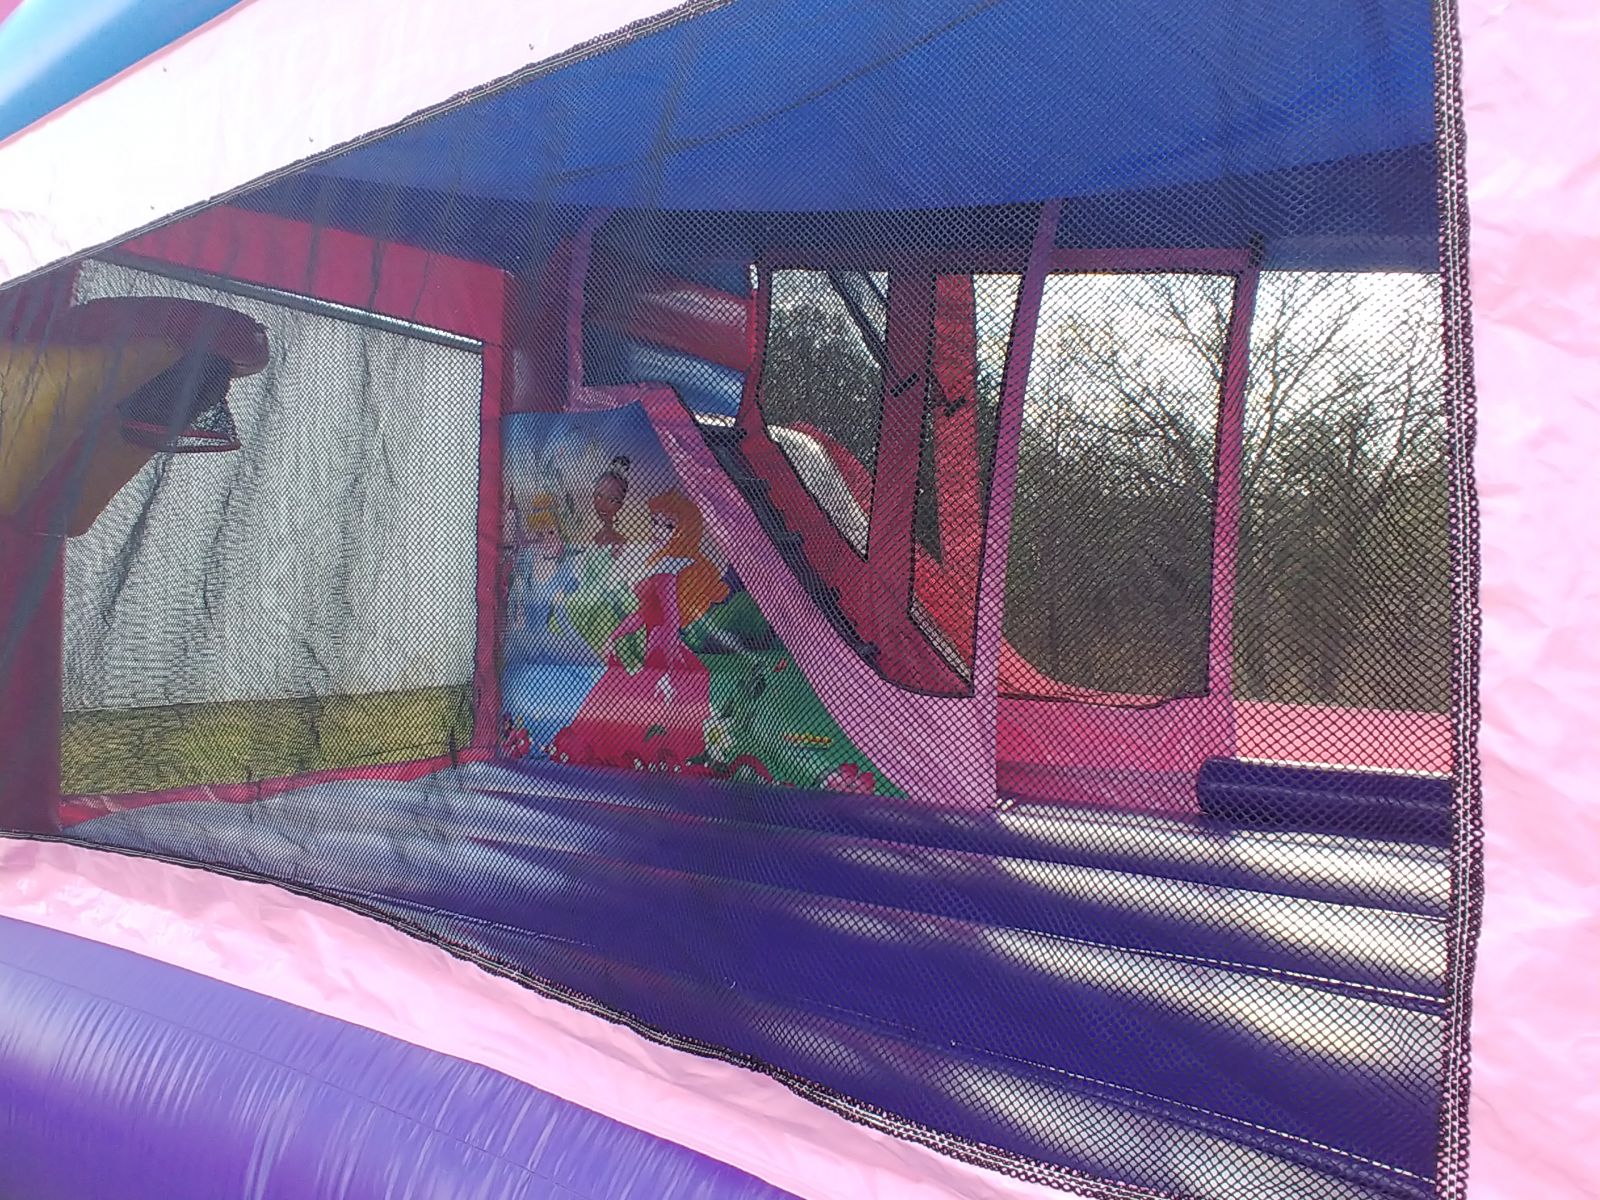 Disney Princess Combo interior view with basketball hoop and climbing wall with slide bounce house